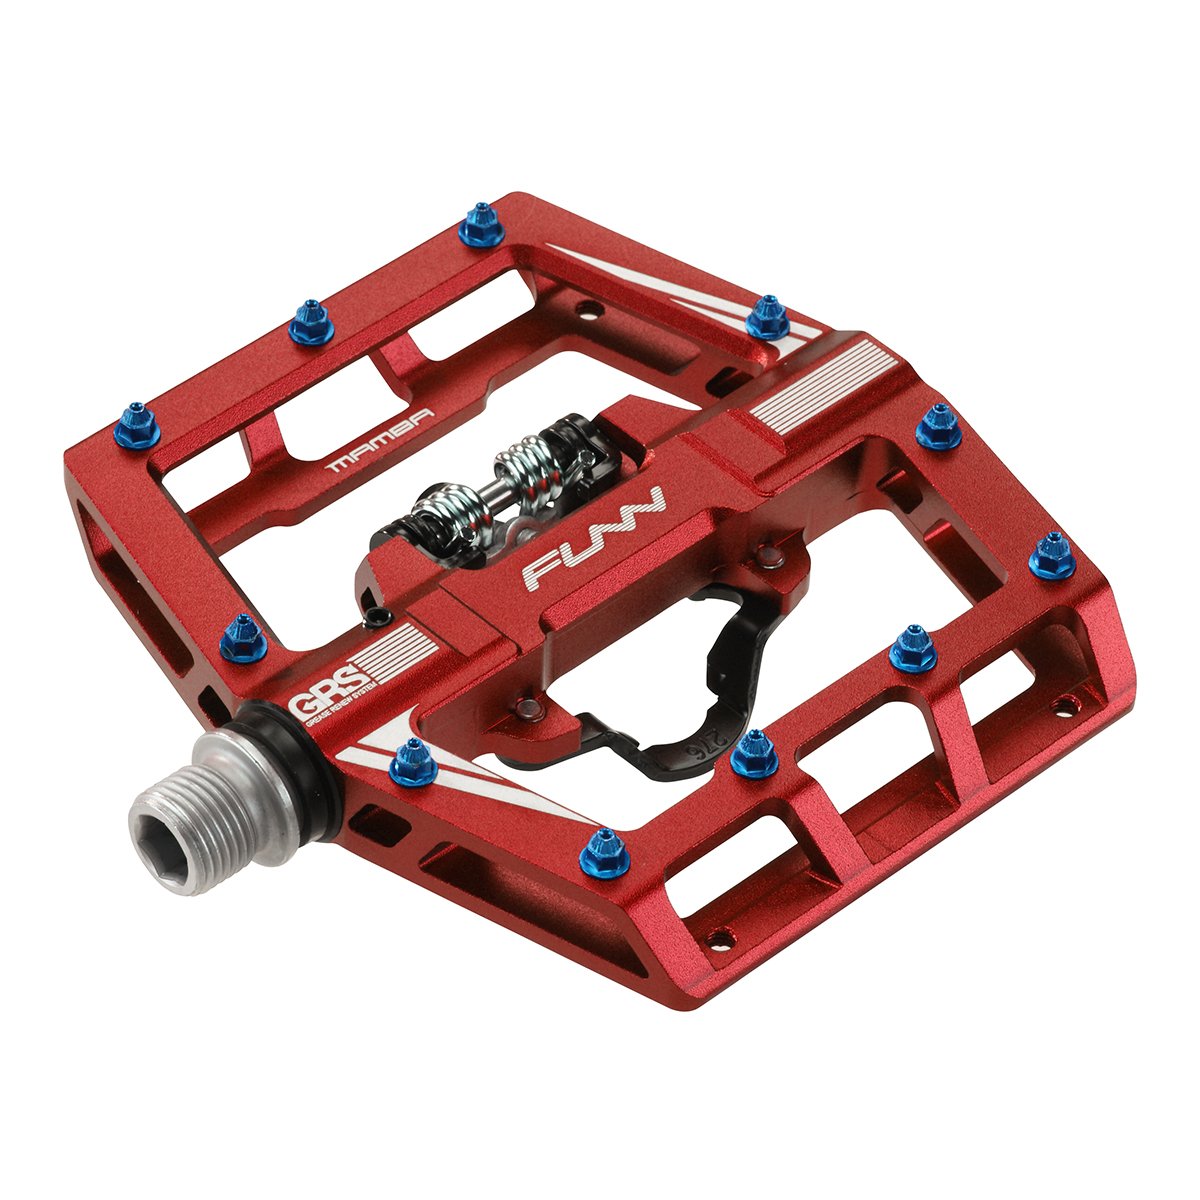 red metal bike pedals